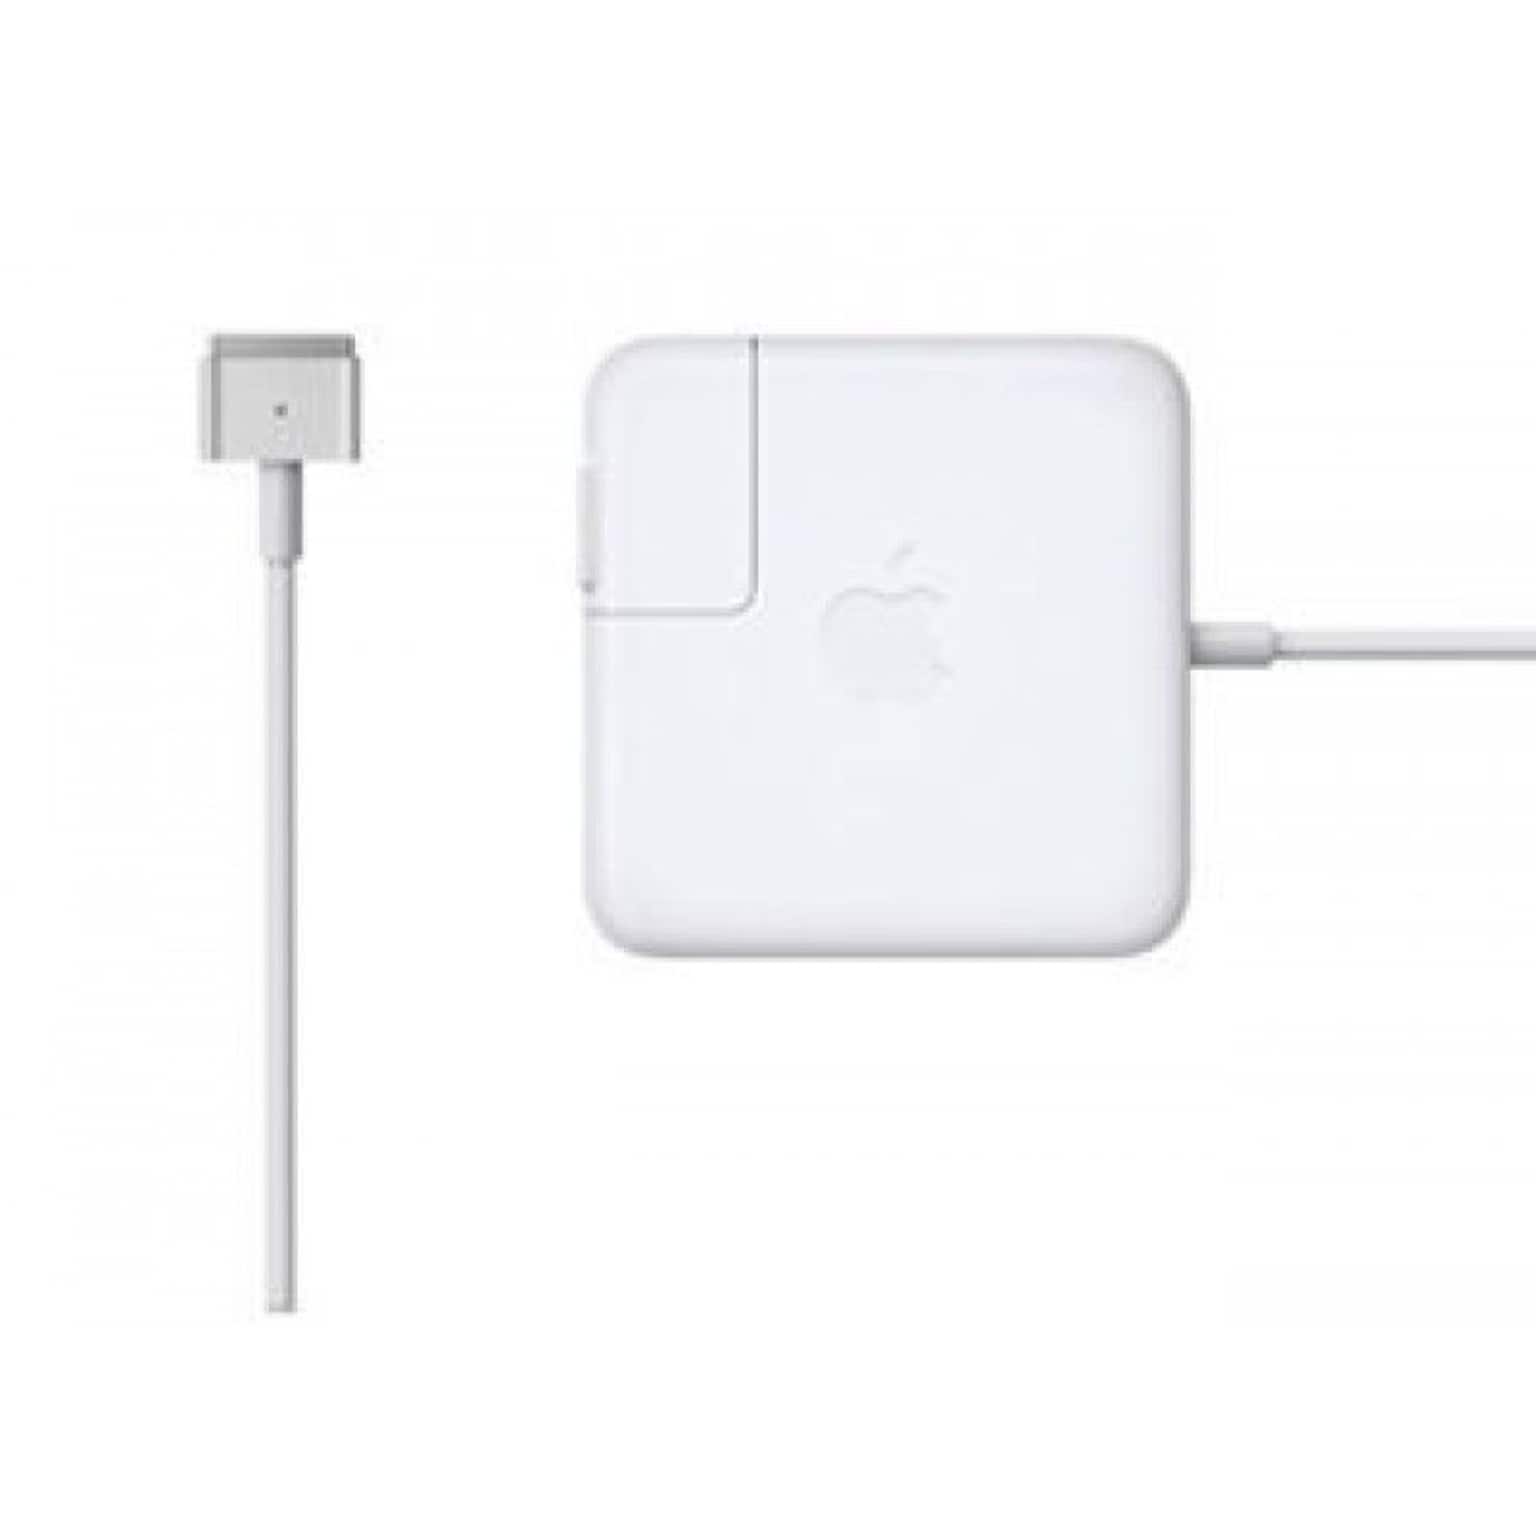 Apple 60W MagSafe 2 Power Adapter for MacBook Pro 13 with Retina Display